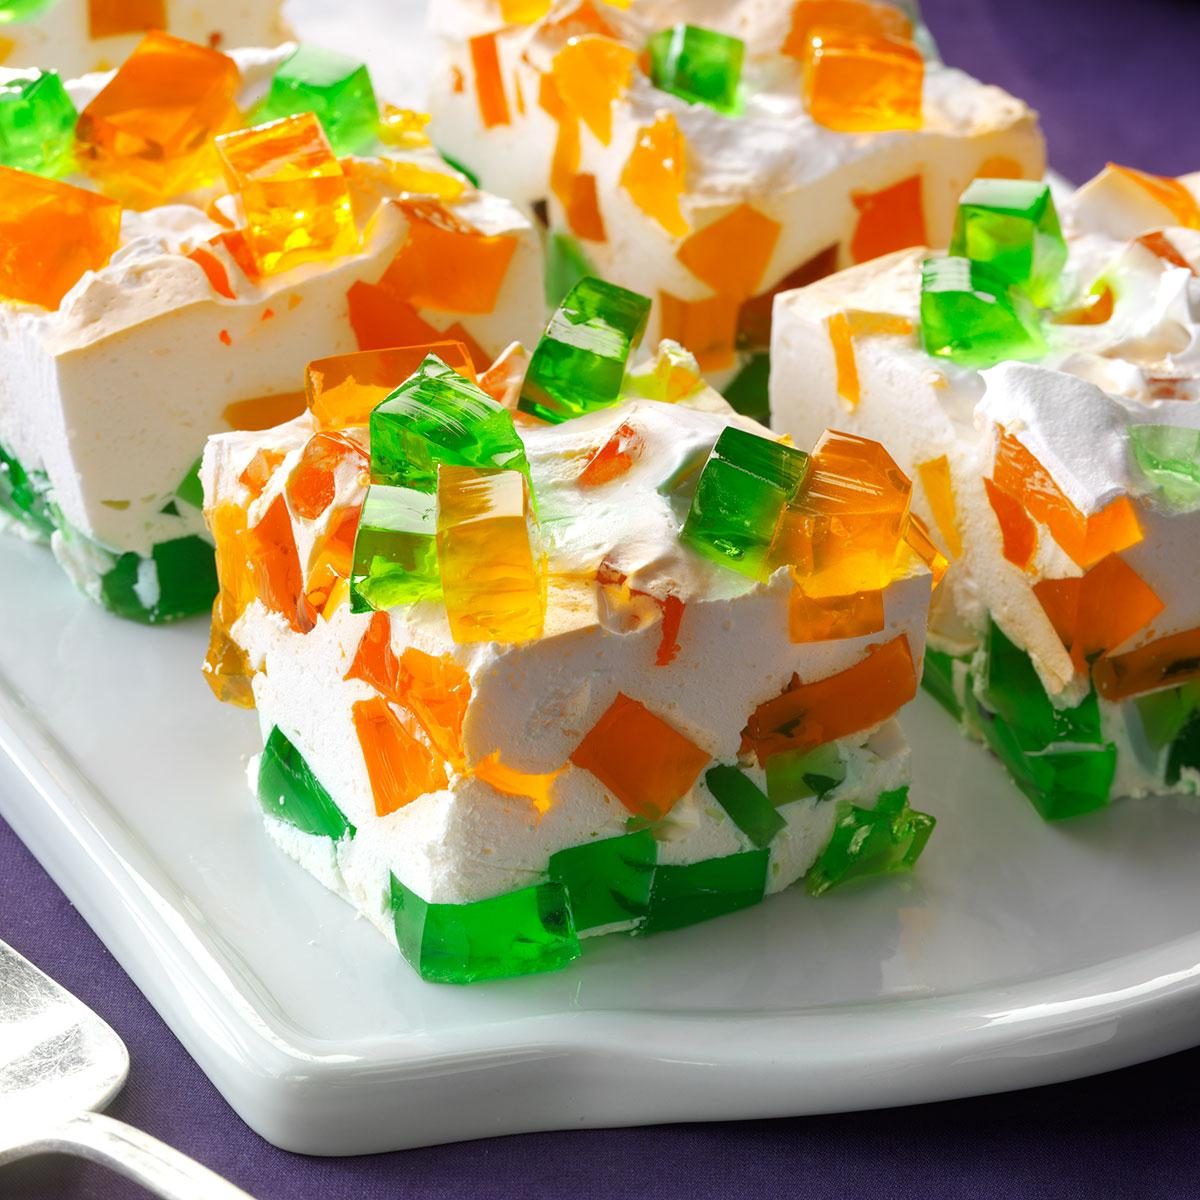 NATIONAL JELL-O WEEK - February 12-18, 2024 - National Today